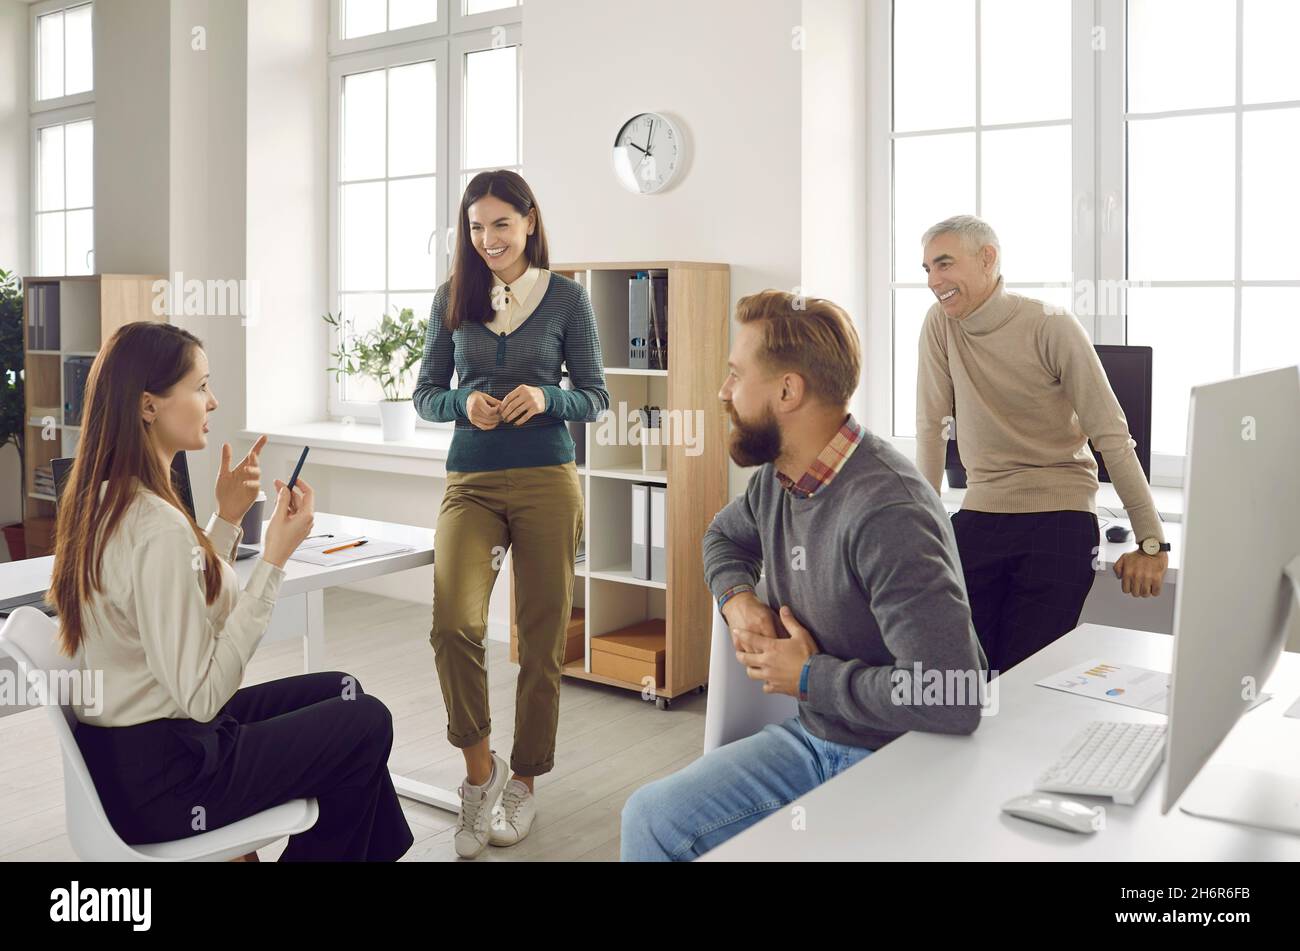 Smiling diverse people involved in team discussion Stock Photo